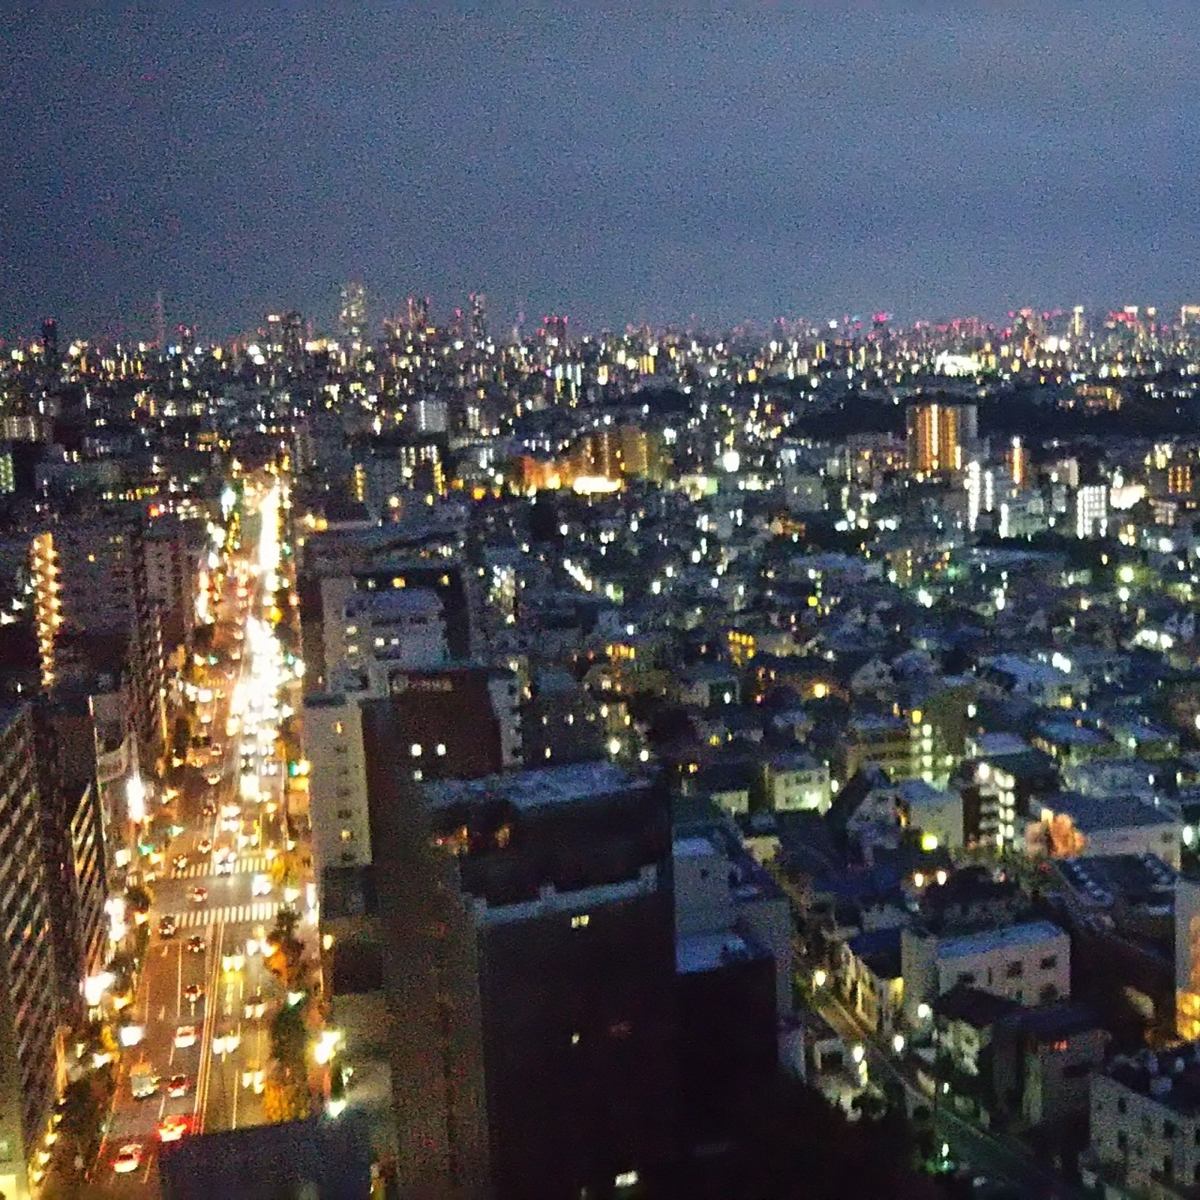 The panoramic view of Tokyo from the top floor of the 20th floor is superb!